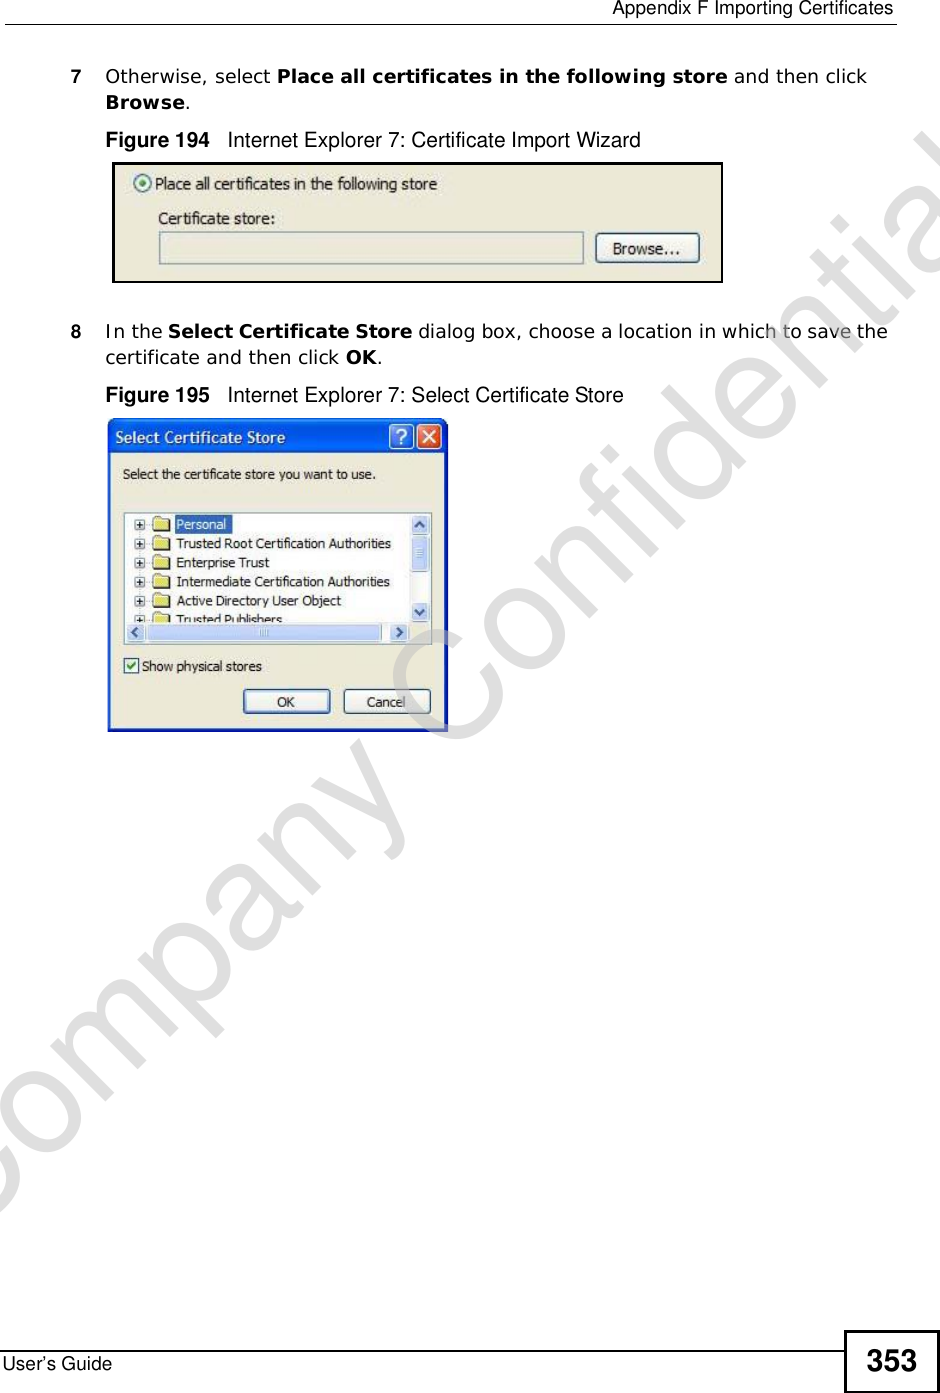  Appendix FImporting CertificatesUser’s Guide 3537Otherwise, select Place all certificates in the following store and then click Browse.Figure 194   Internet Explorer 7: Certificate Import Wizard8In the Select Certificate Store dialog box, choose a location in which to save the certificate and then click OK.Figure 195   Internet Explorer 7: Select Certificate StoreCompany Confidential